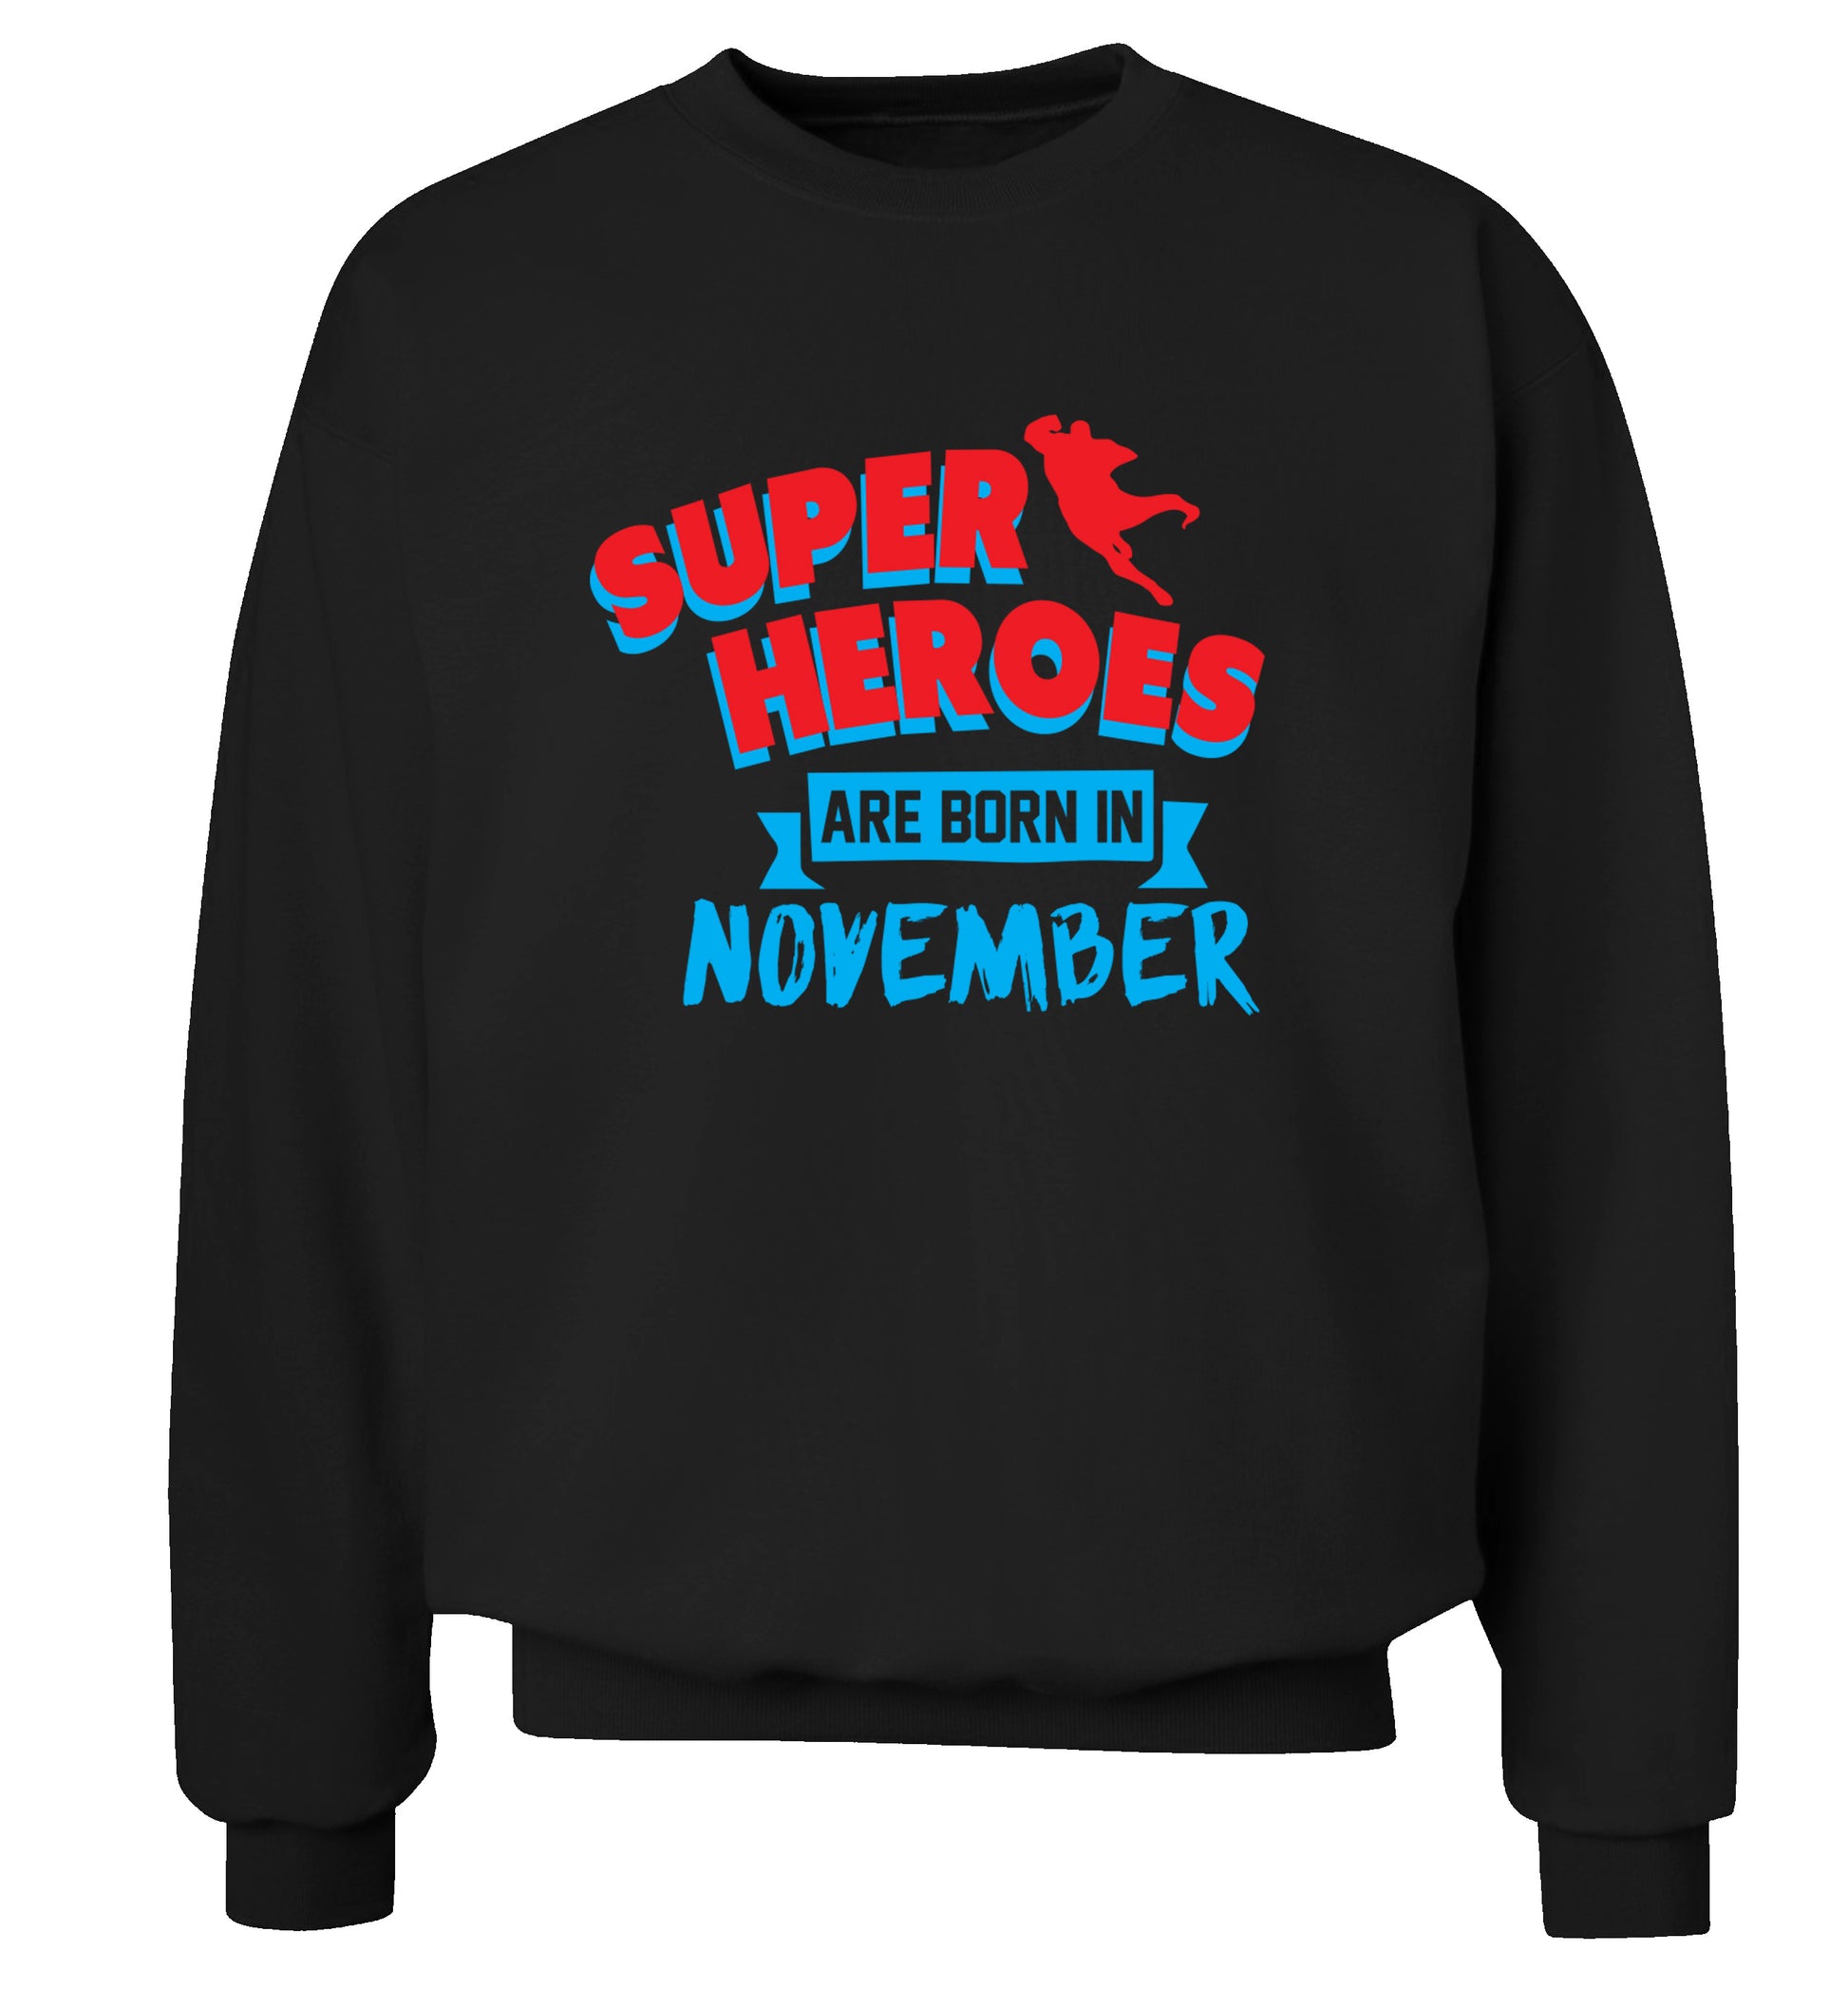 Superheroes are born in November Adult's unisex black Sweater 2XL